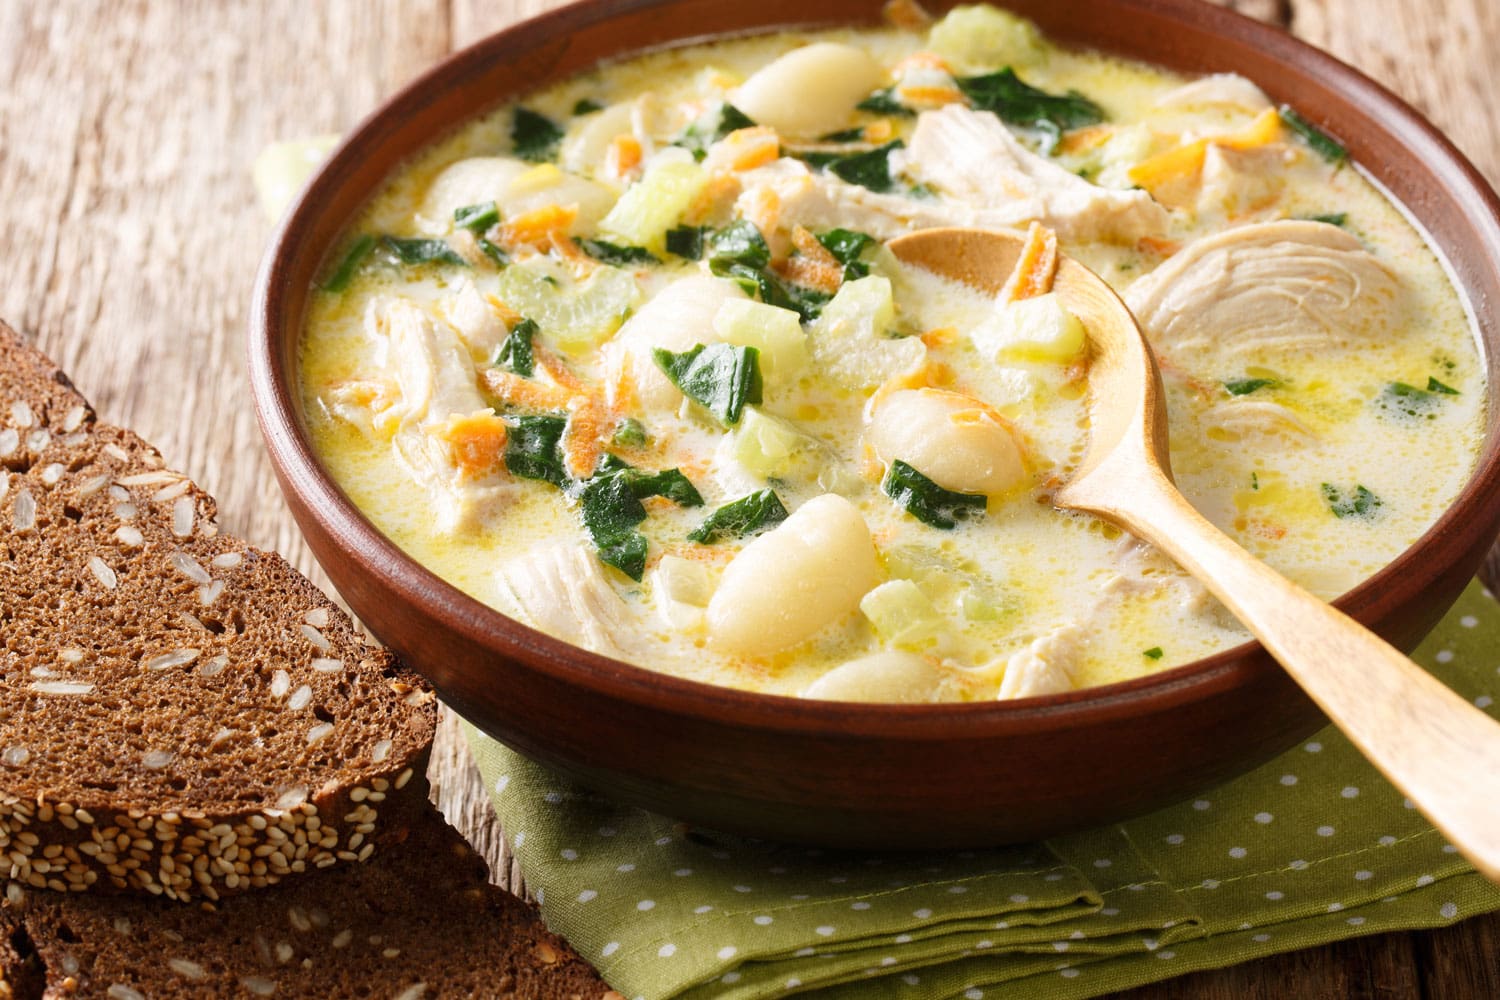 cream soup with gnocchi, chicken and spinach served with bread close-up in a bowl on the table. Horizontal 